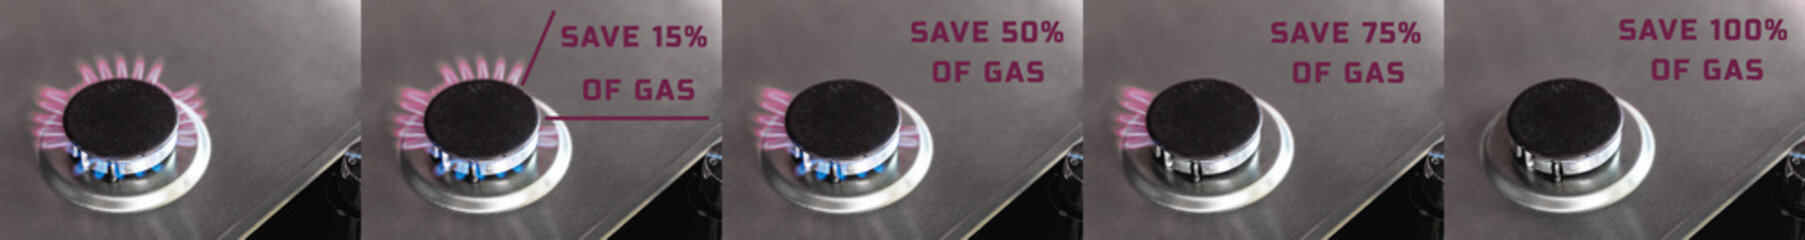 15% Fifteen percent gas savings in the European Union EU gas stove burner due to sanctions with an...